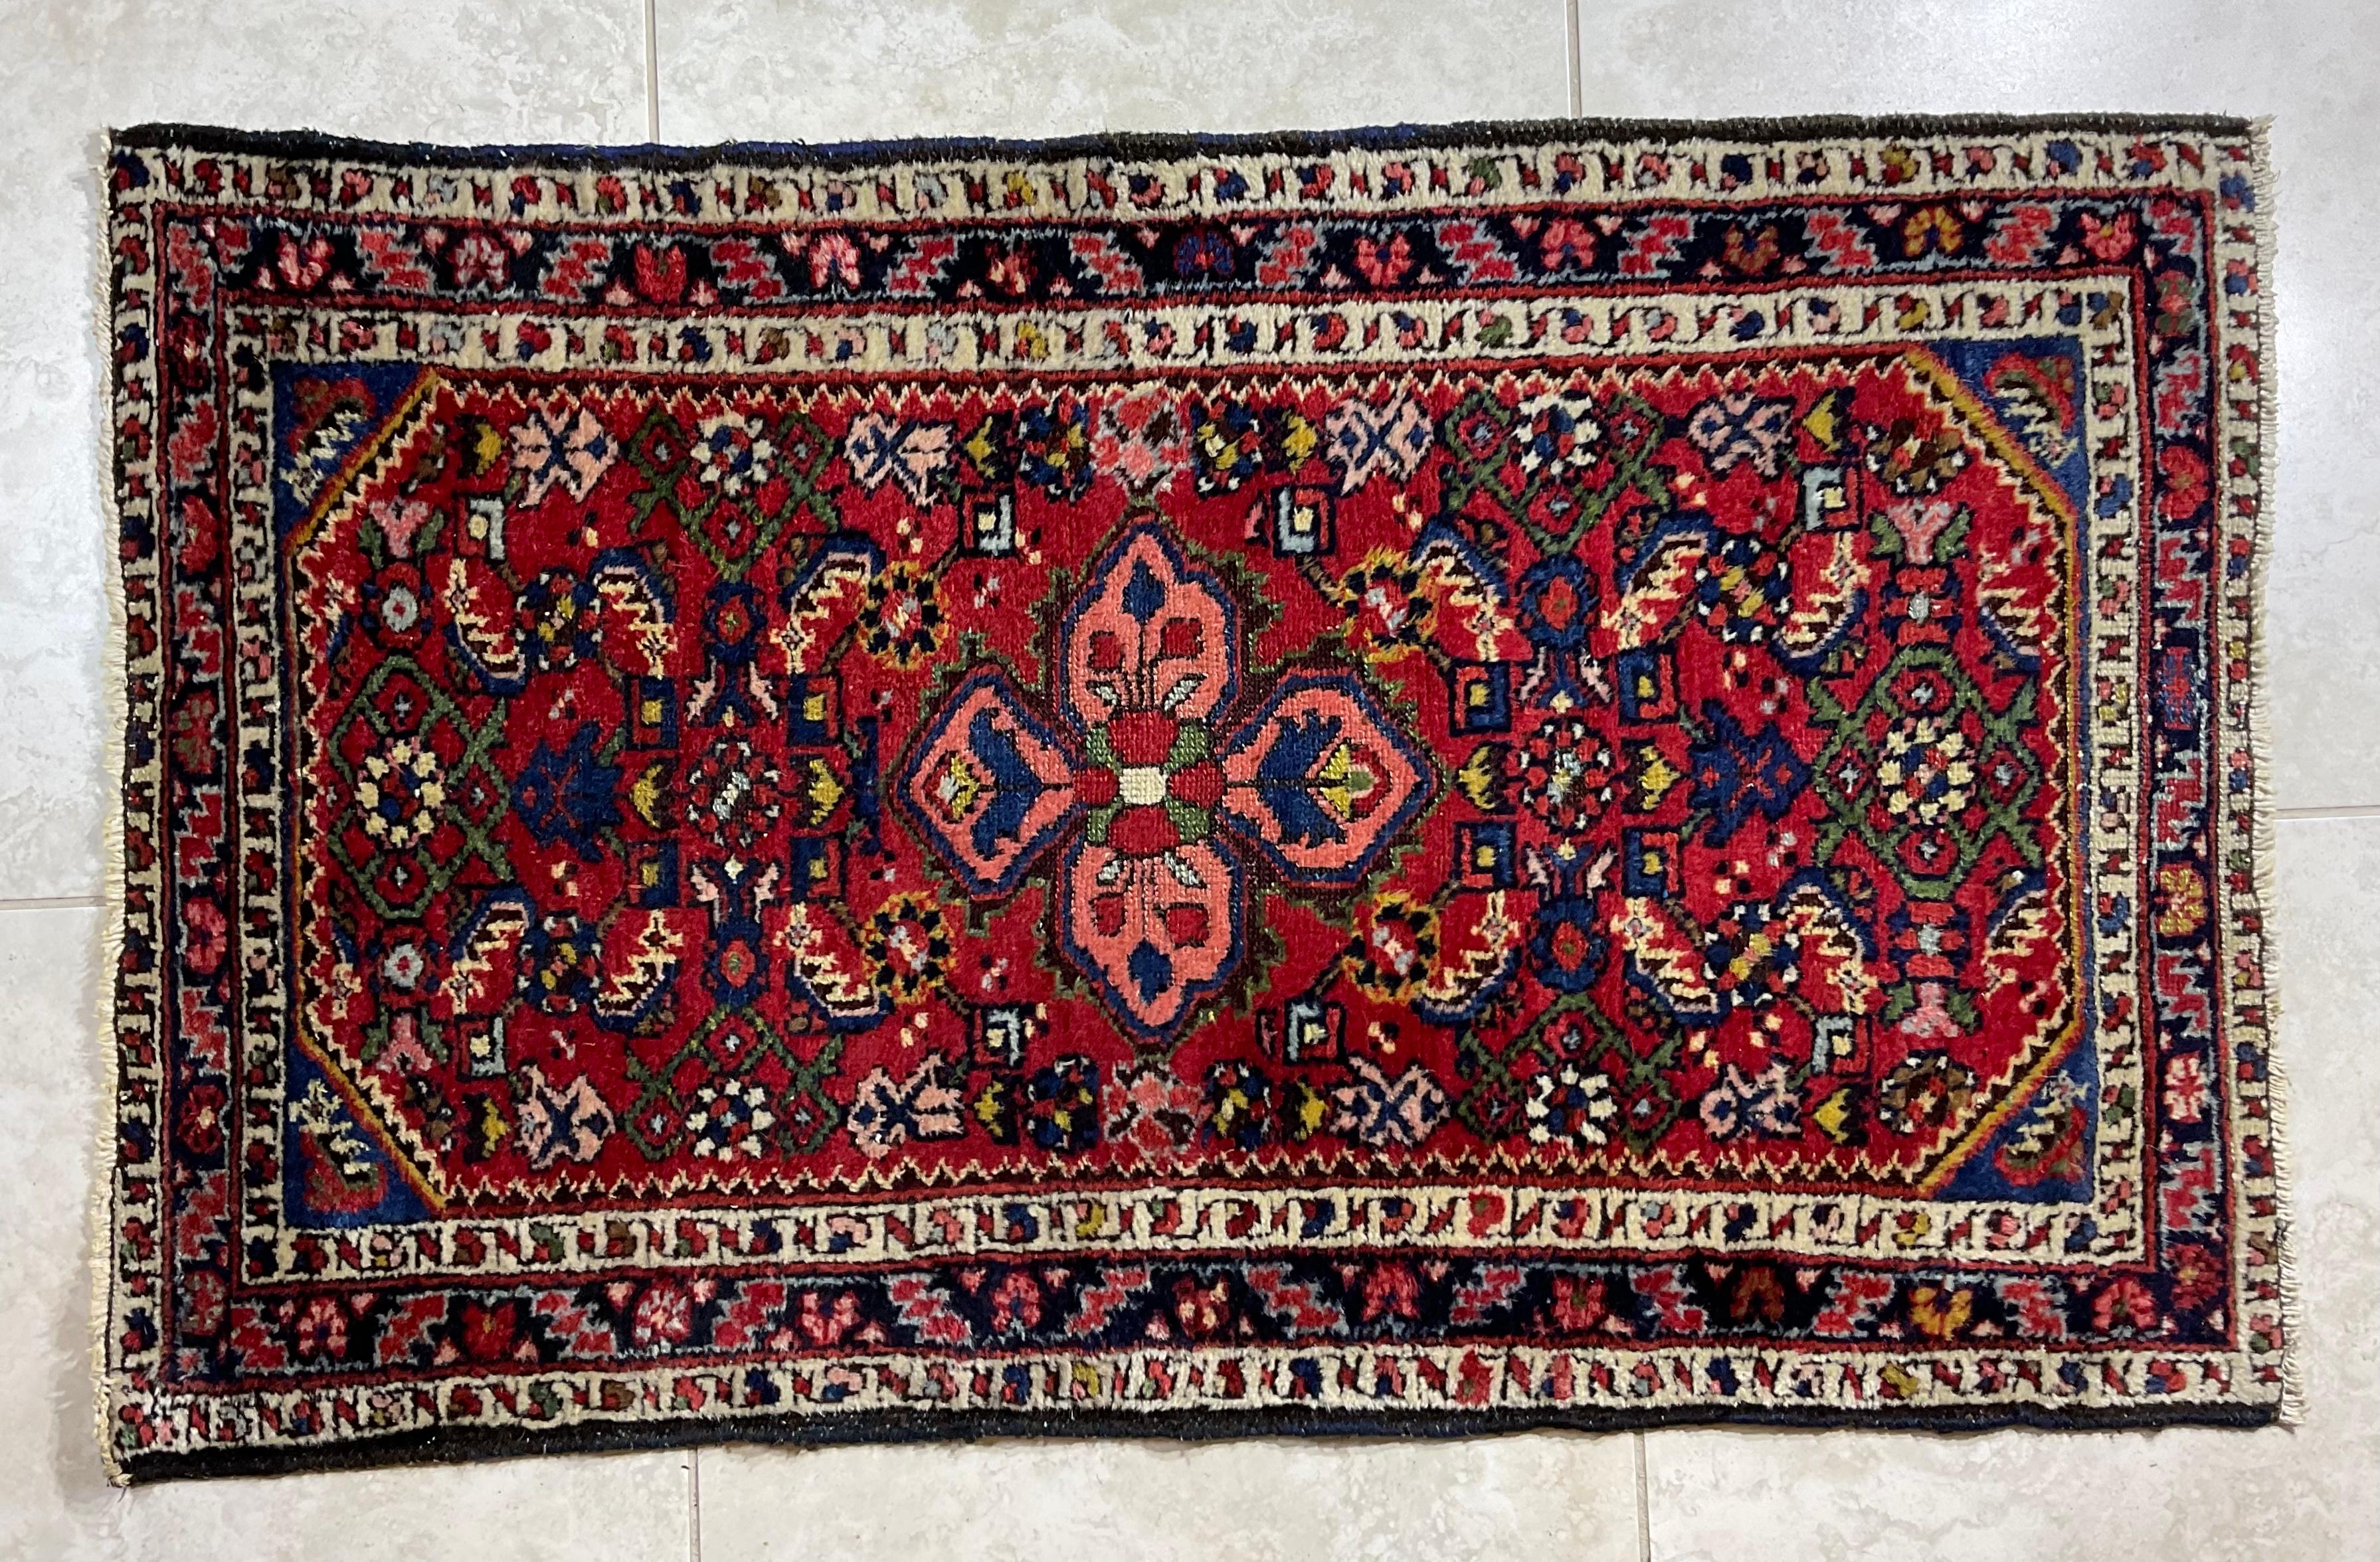 Beautiful handwoven fine wool Persian rug with floor Floral and geometric motifs.
Professionally hand washed, ready to use.